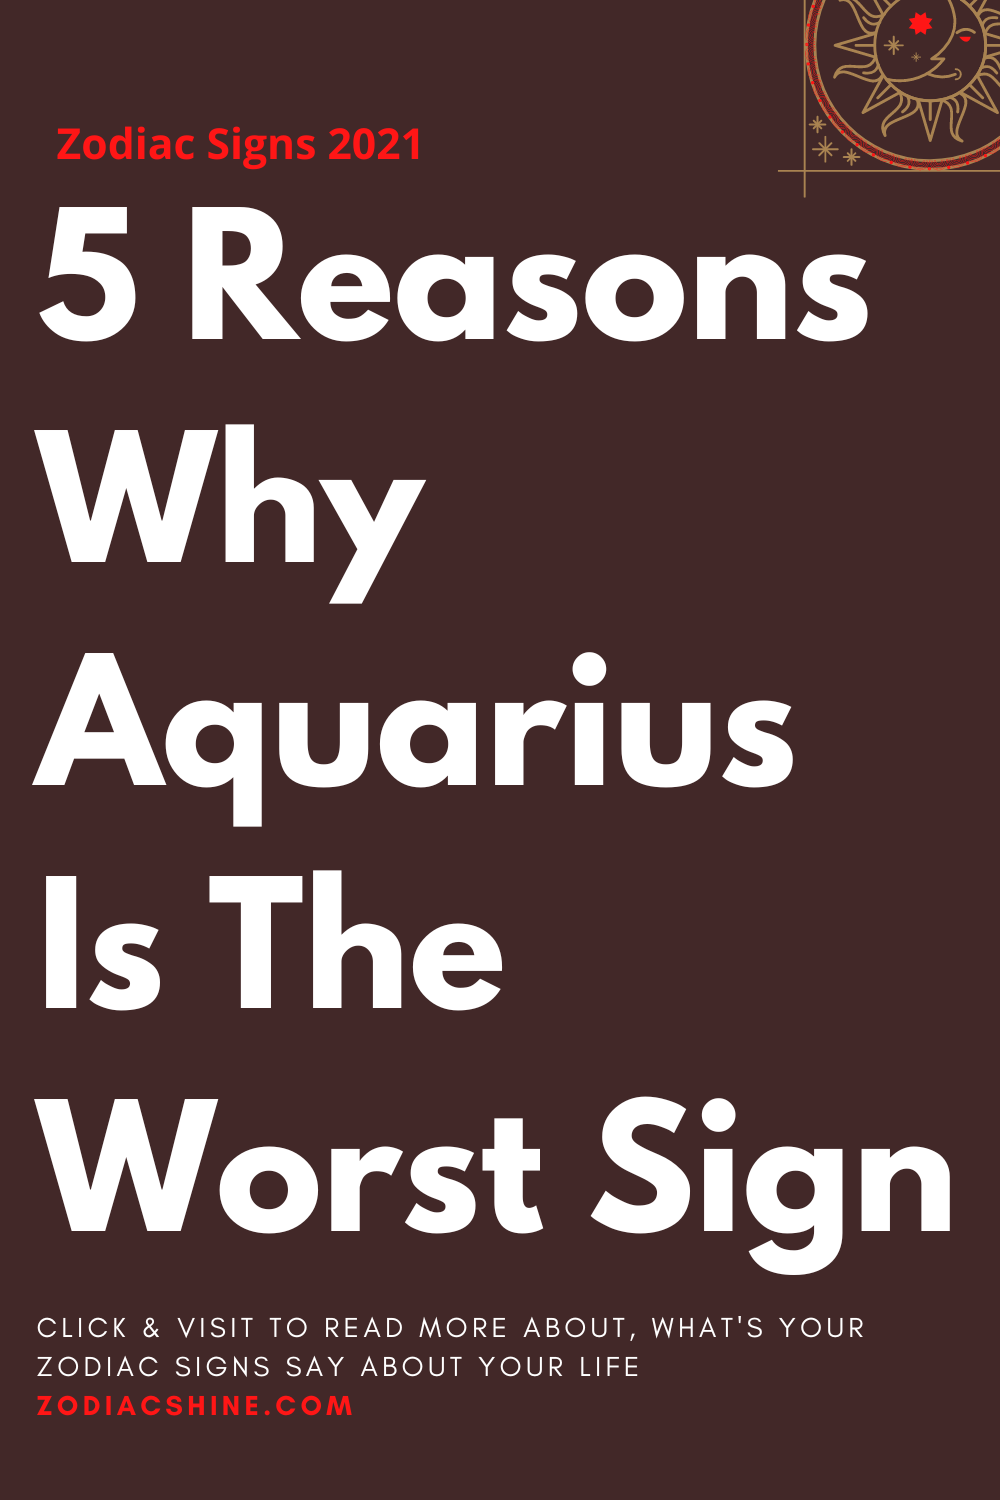 5 Reasons Why Aquarius Is The Worst Sign